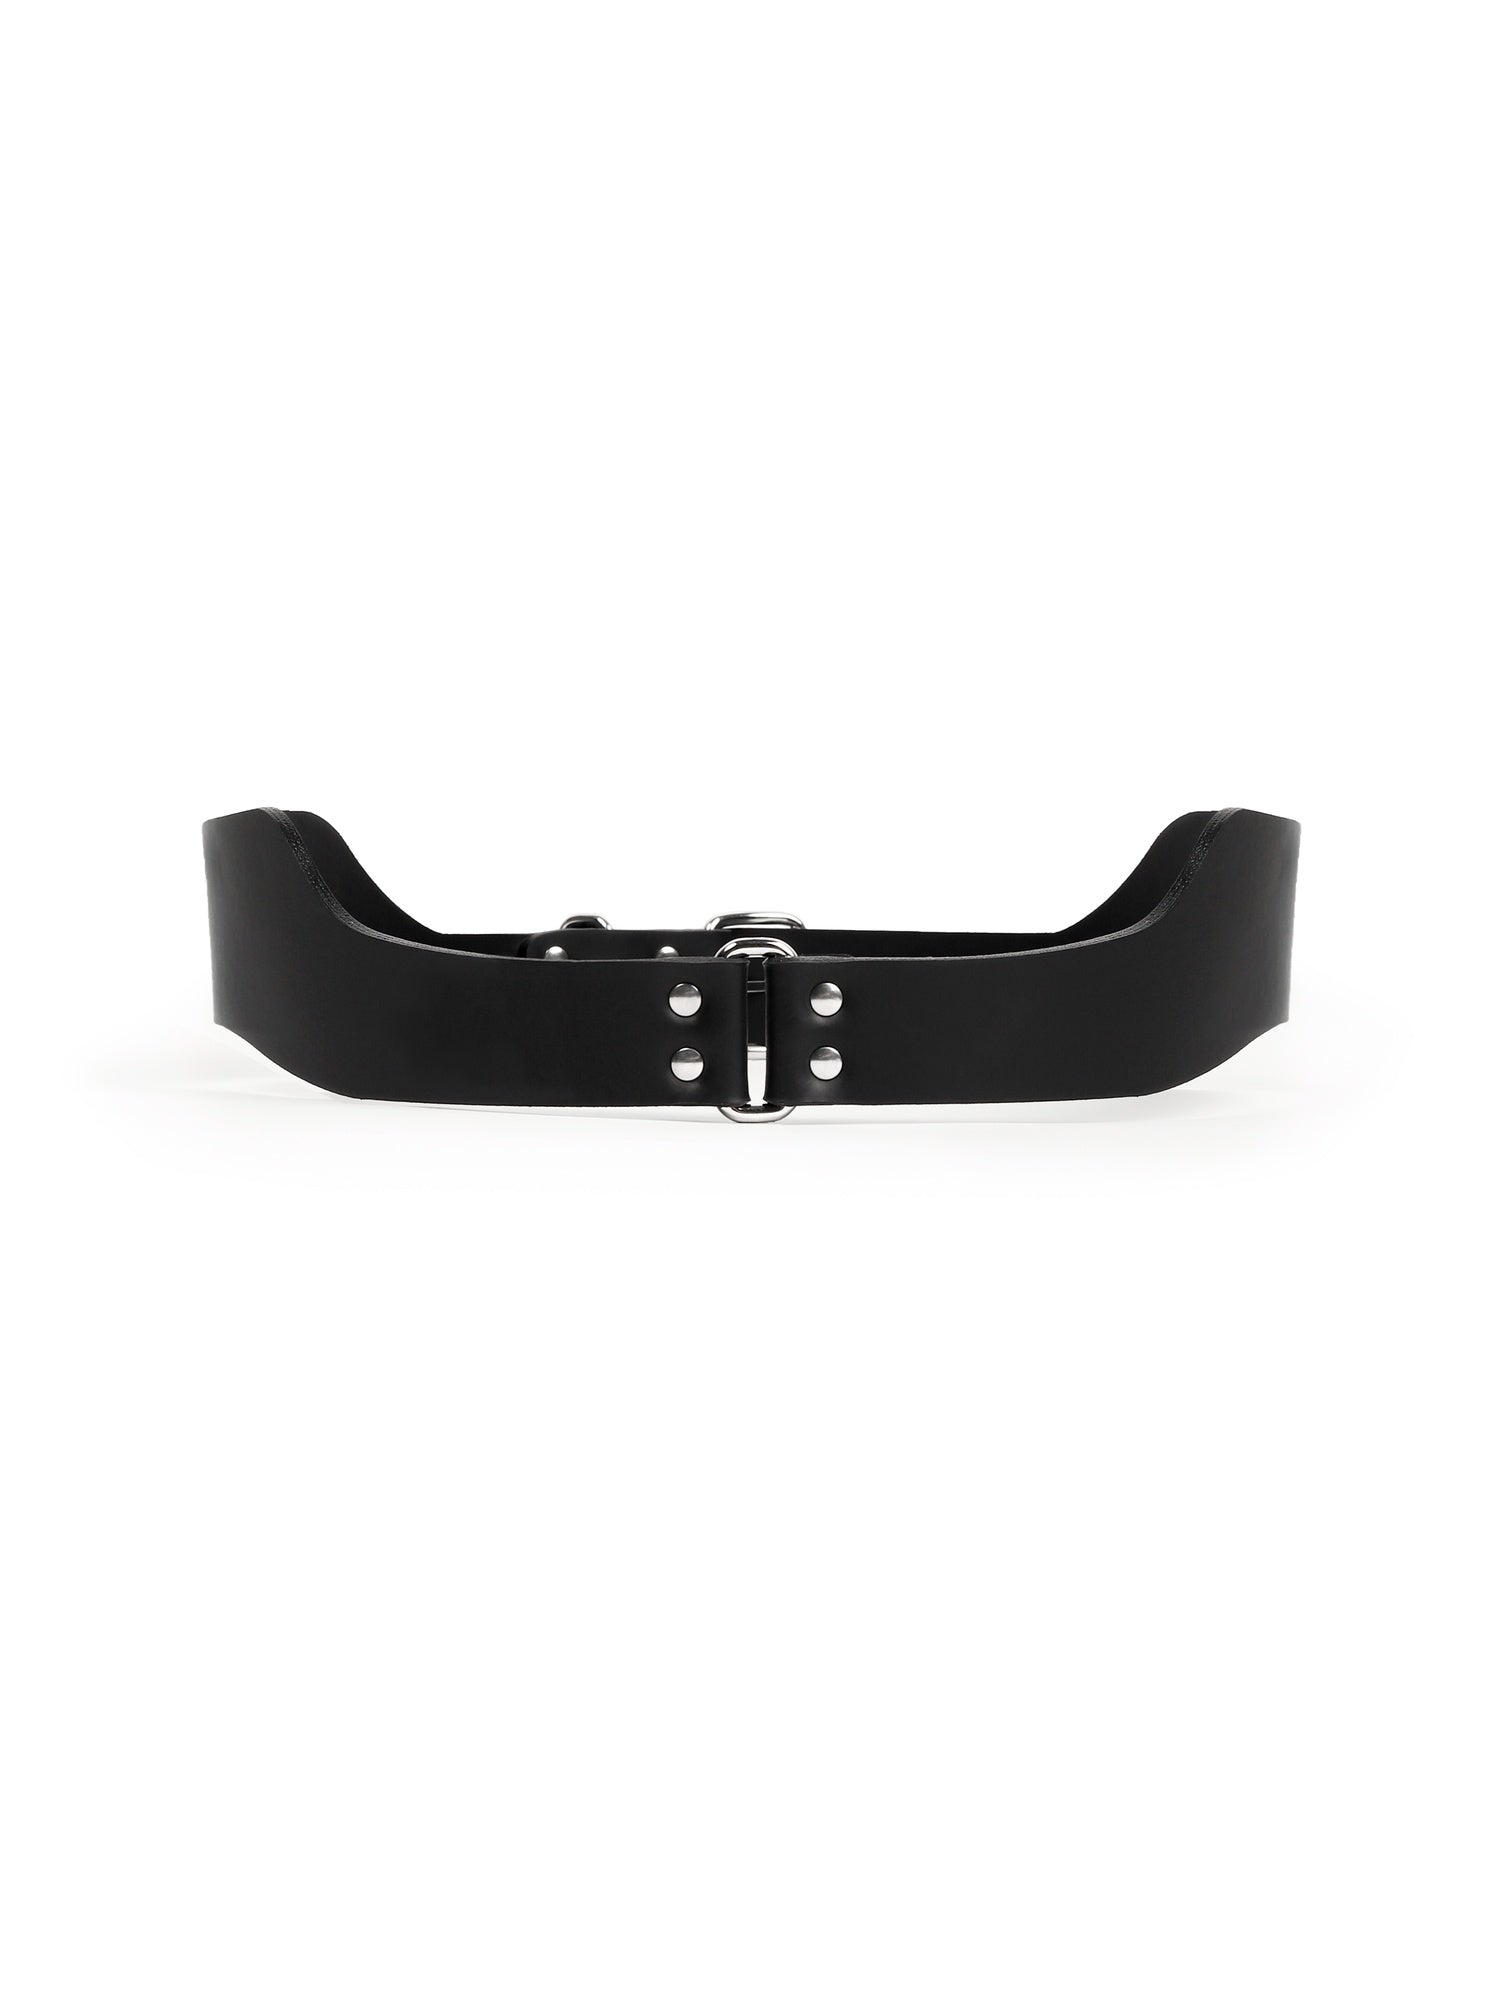 Back view of the Elisabeth vegan leather belt by Baby turns Blue Paris